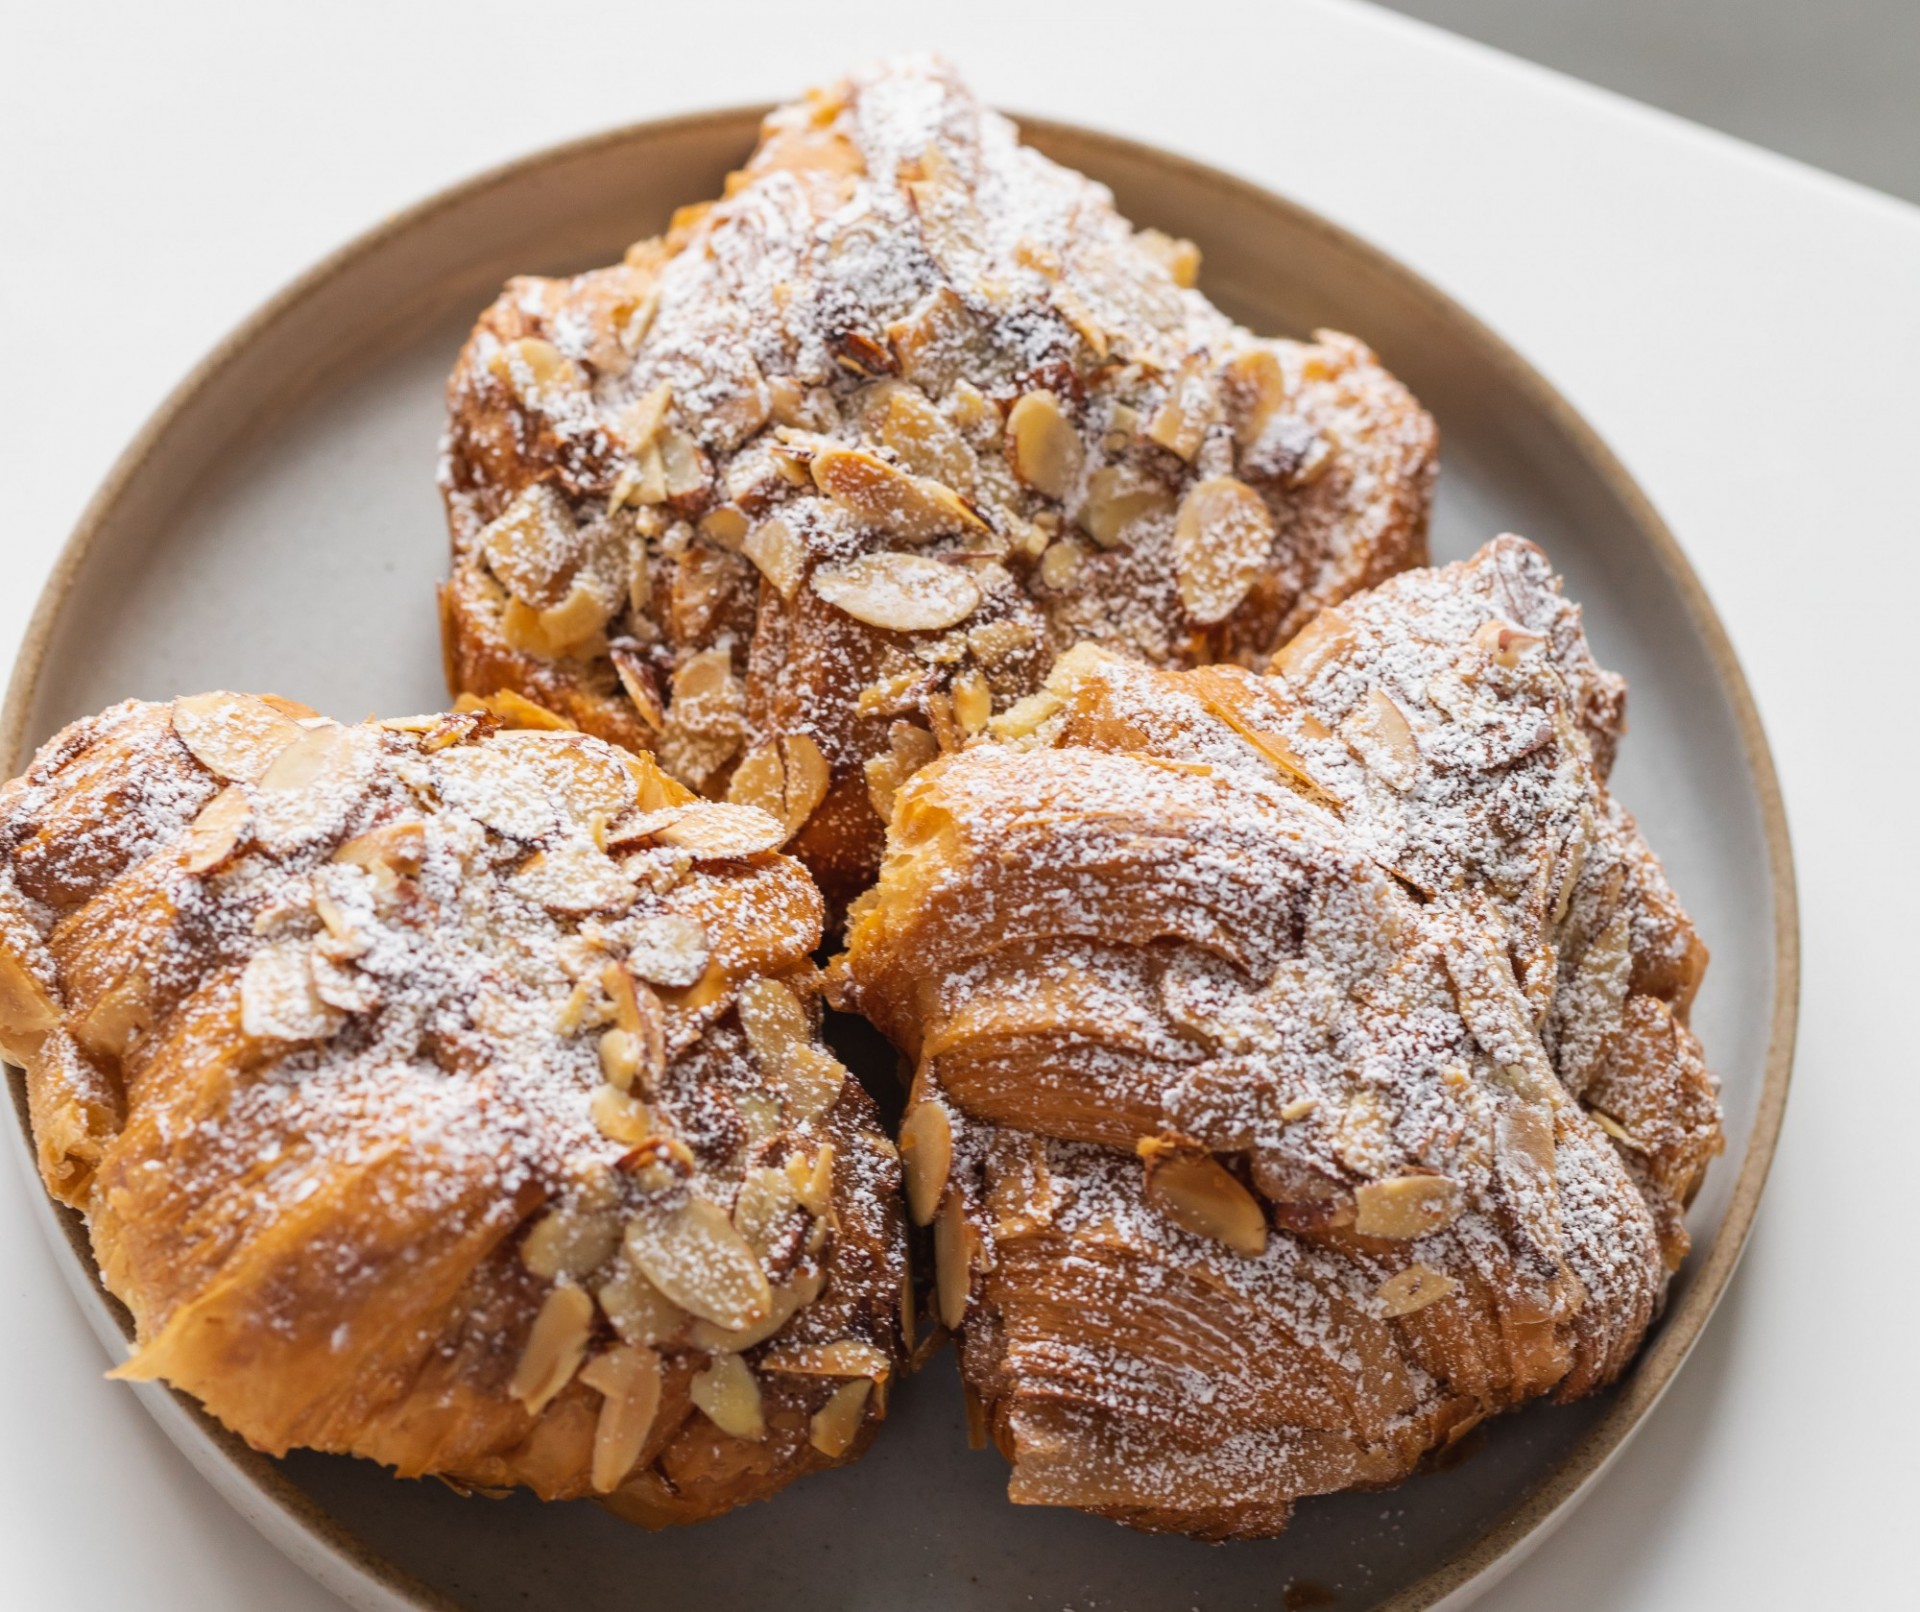 A plate full of almond croissants